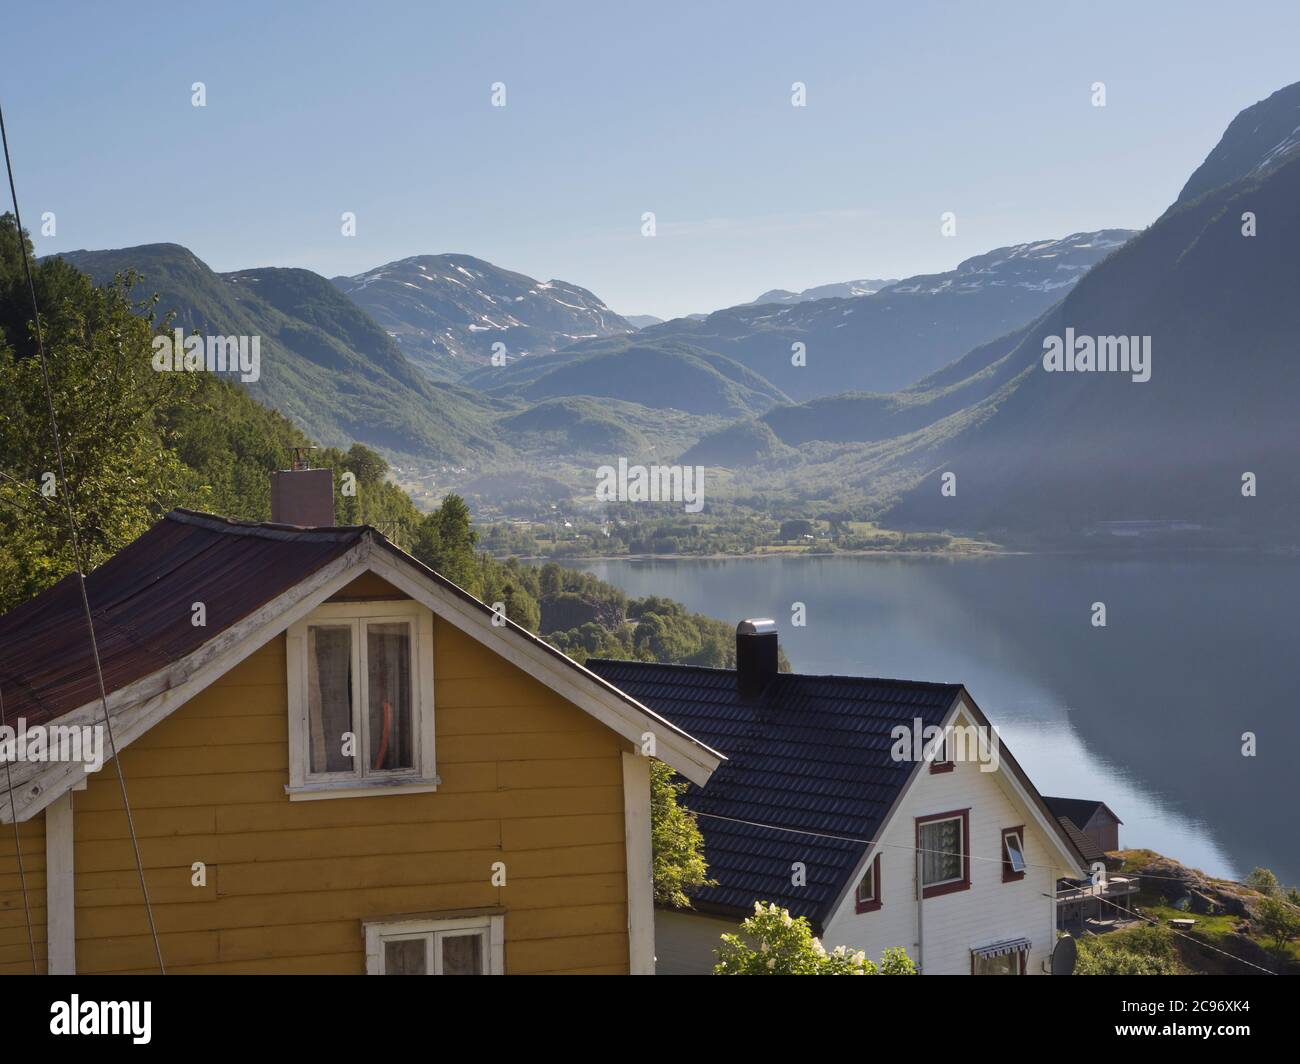 Røldal. a picturesque village in a valley in western Norway, early morning panorama from a hotel balcony Stock Photo